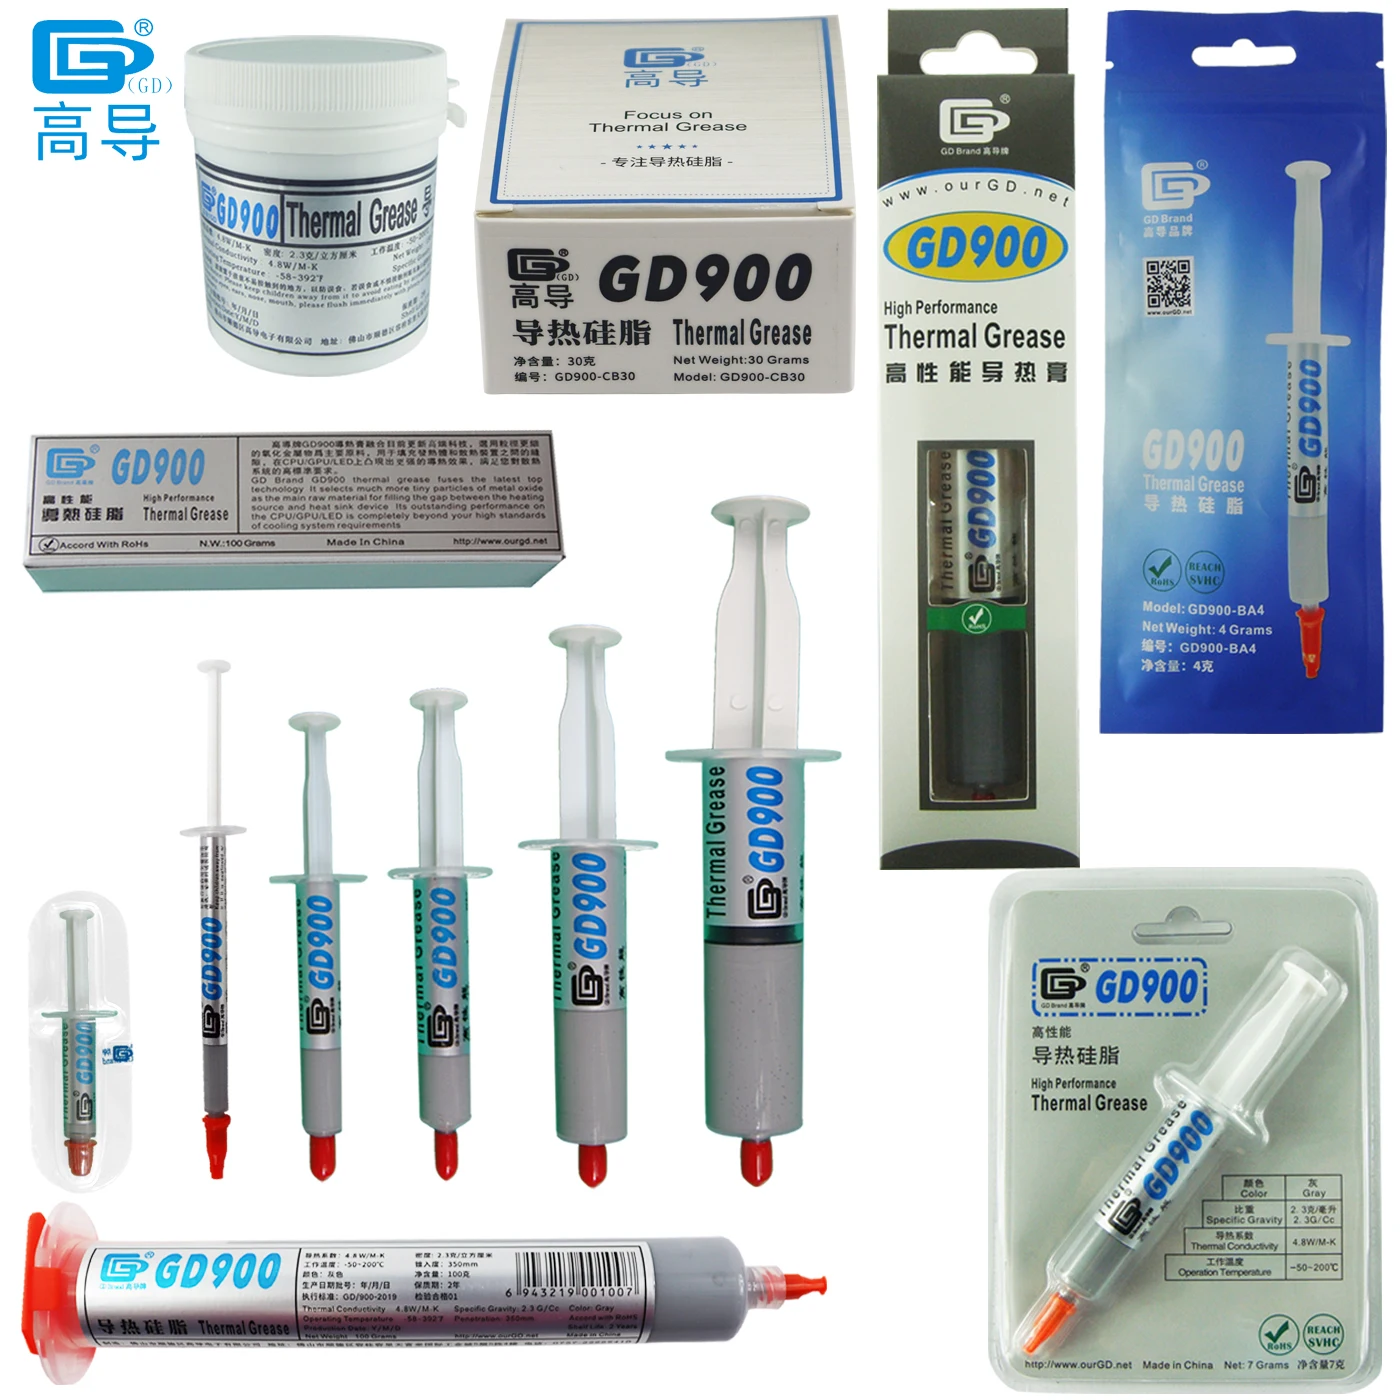 GD900 Thermal Conductive Grease Paste Silicone Plaster Heat Sink Compound High Performance Gray SSY1 SY1 SY3 SY7 SY15 SY30|thermal conductive|conductive greasegd900 thermal - AliExpress